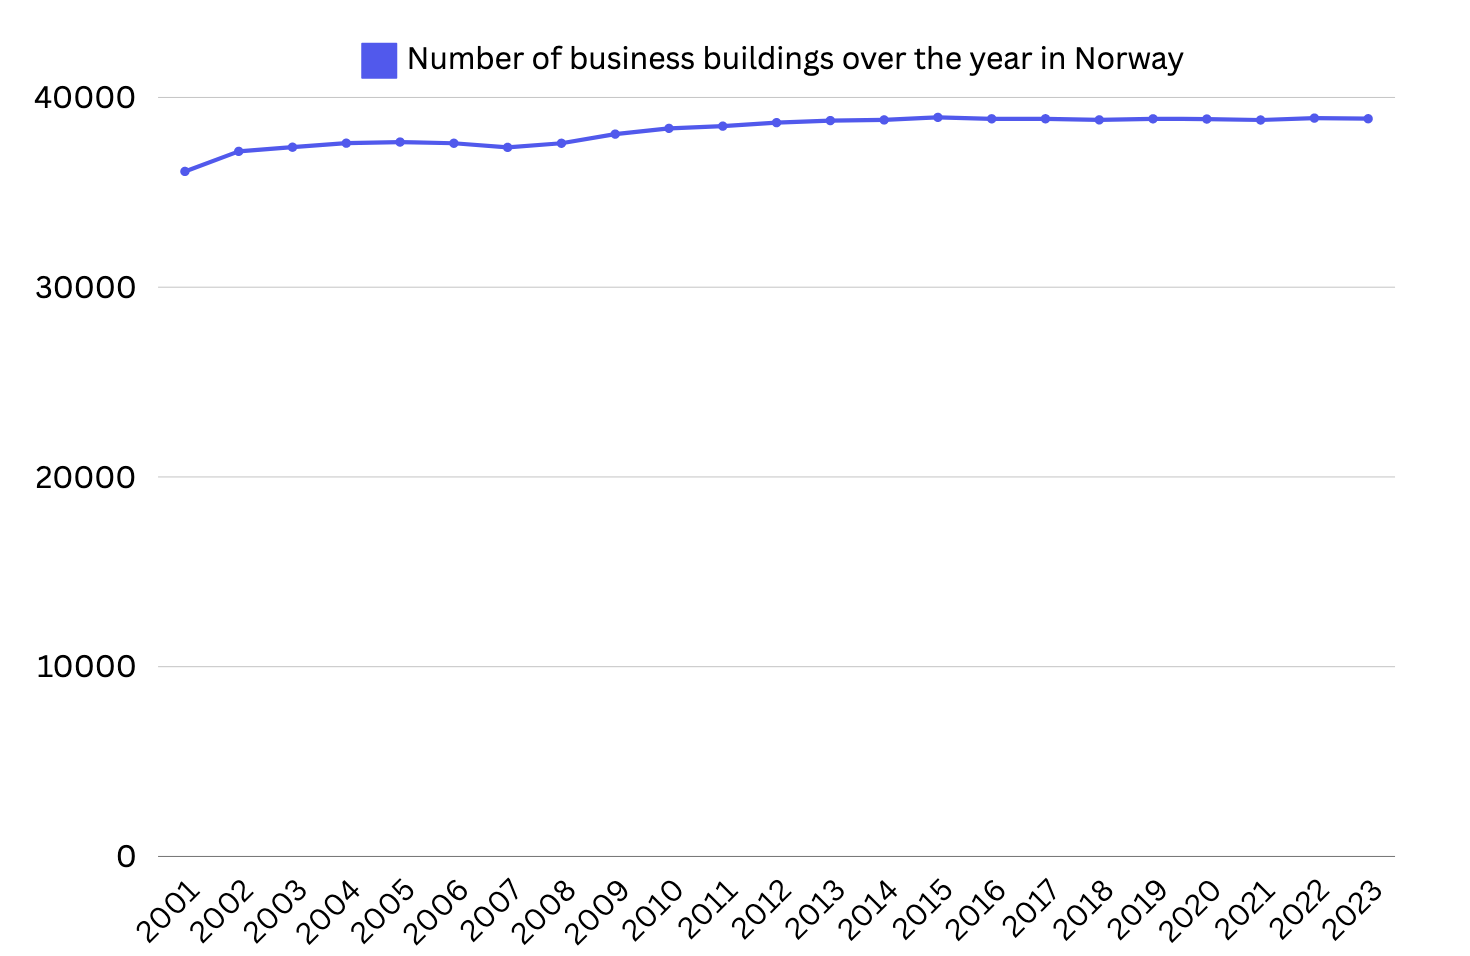 Steady number of new business buildings in Norway over time